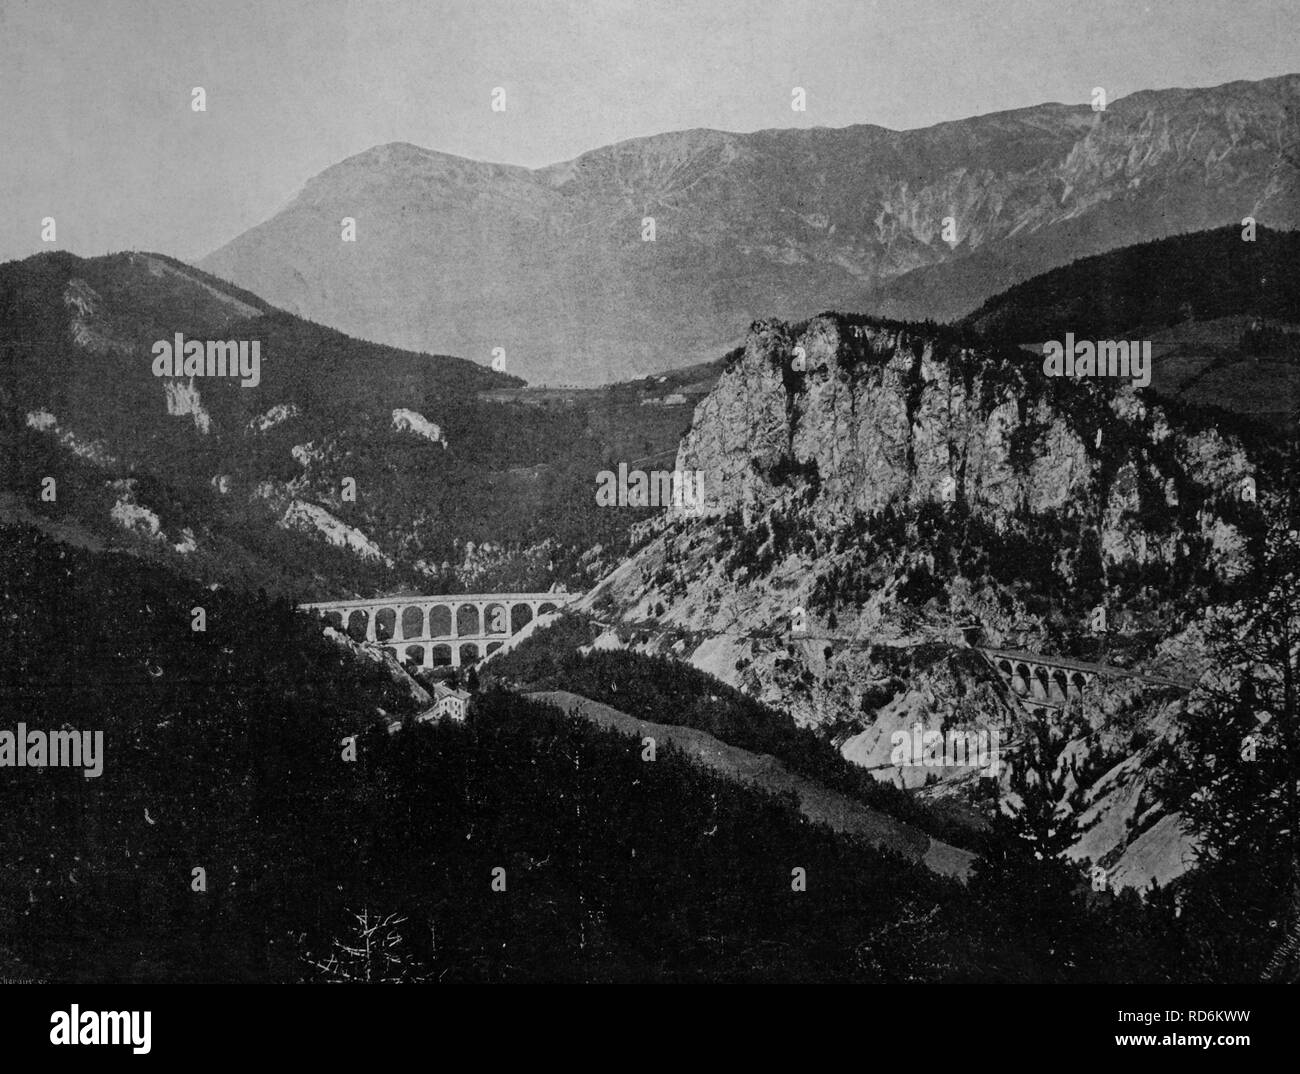 Early autotype of the Semmering Pass, Austria, historical photographs, 1884 Stock Photo